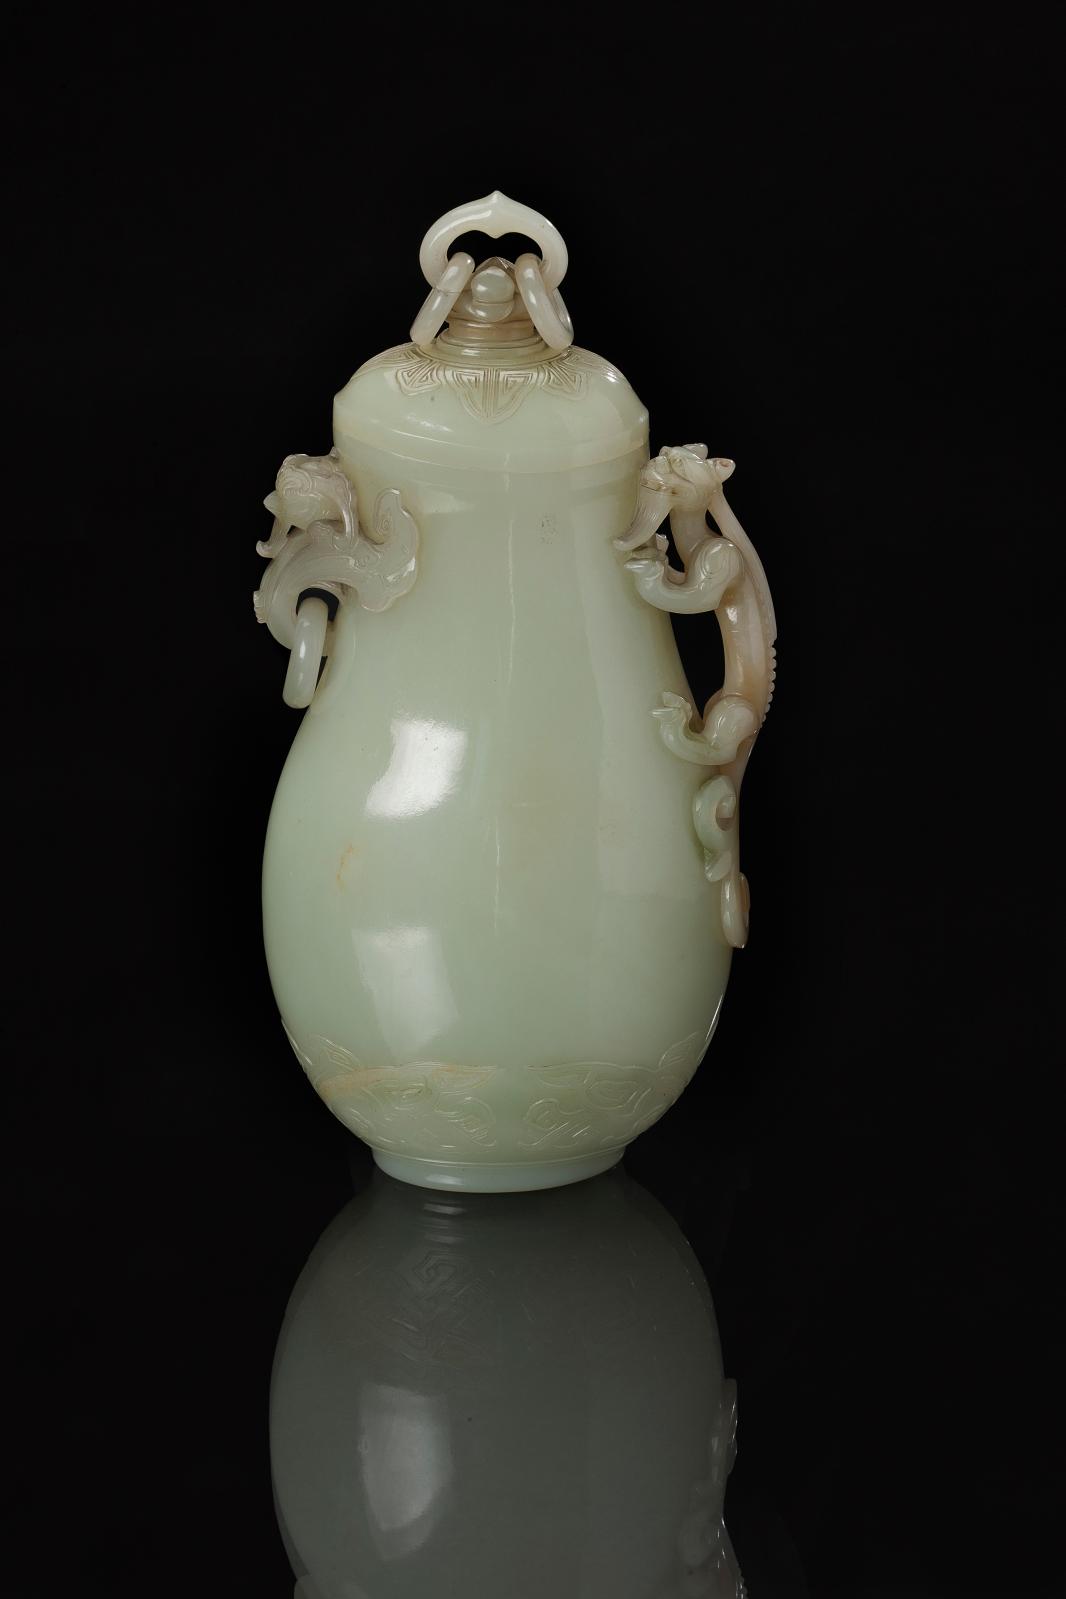 €667,120 China, Qianlong period, 18th century, lidded vase in white jade, handle formed by a chilong carved in the round, phoenix in high relief, h. 2